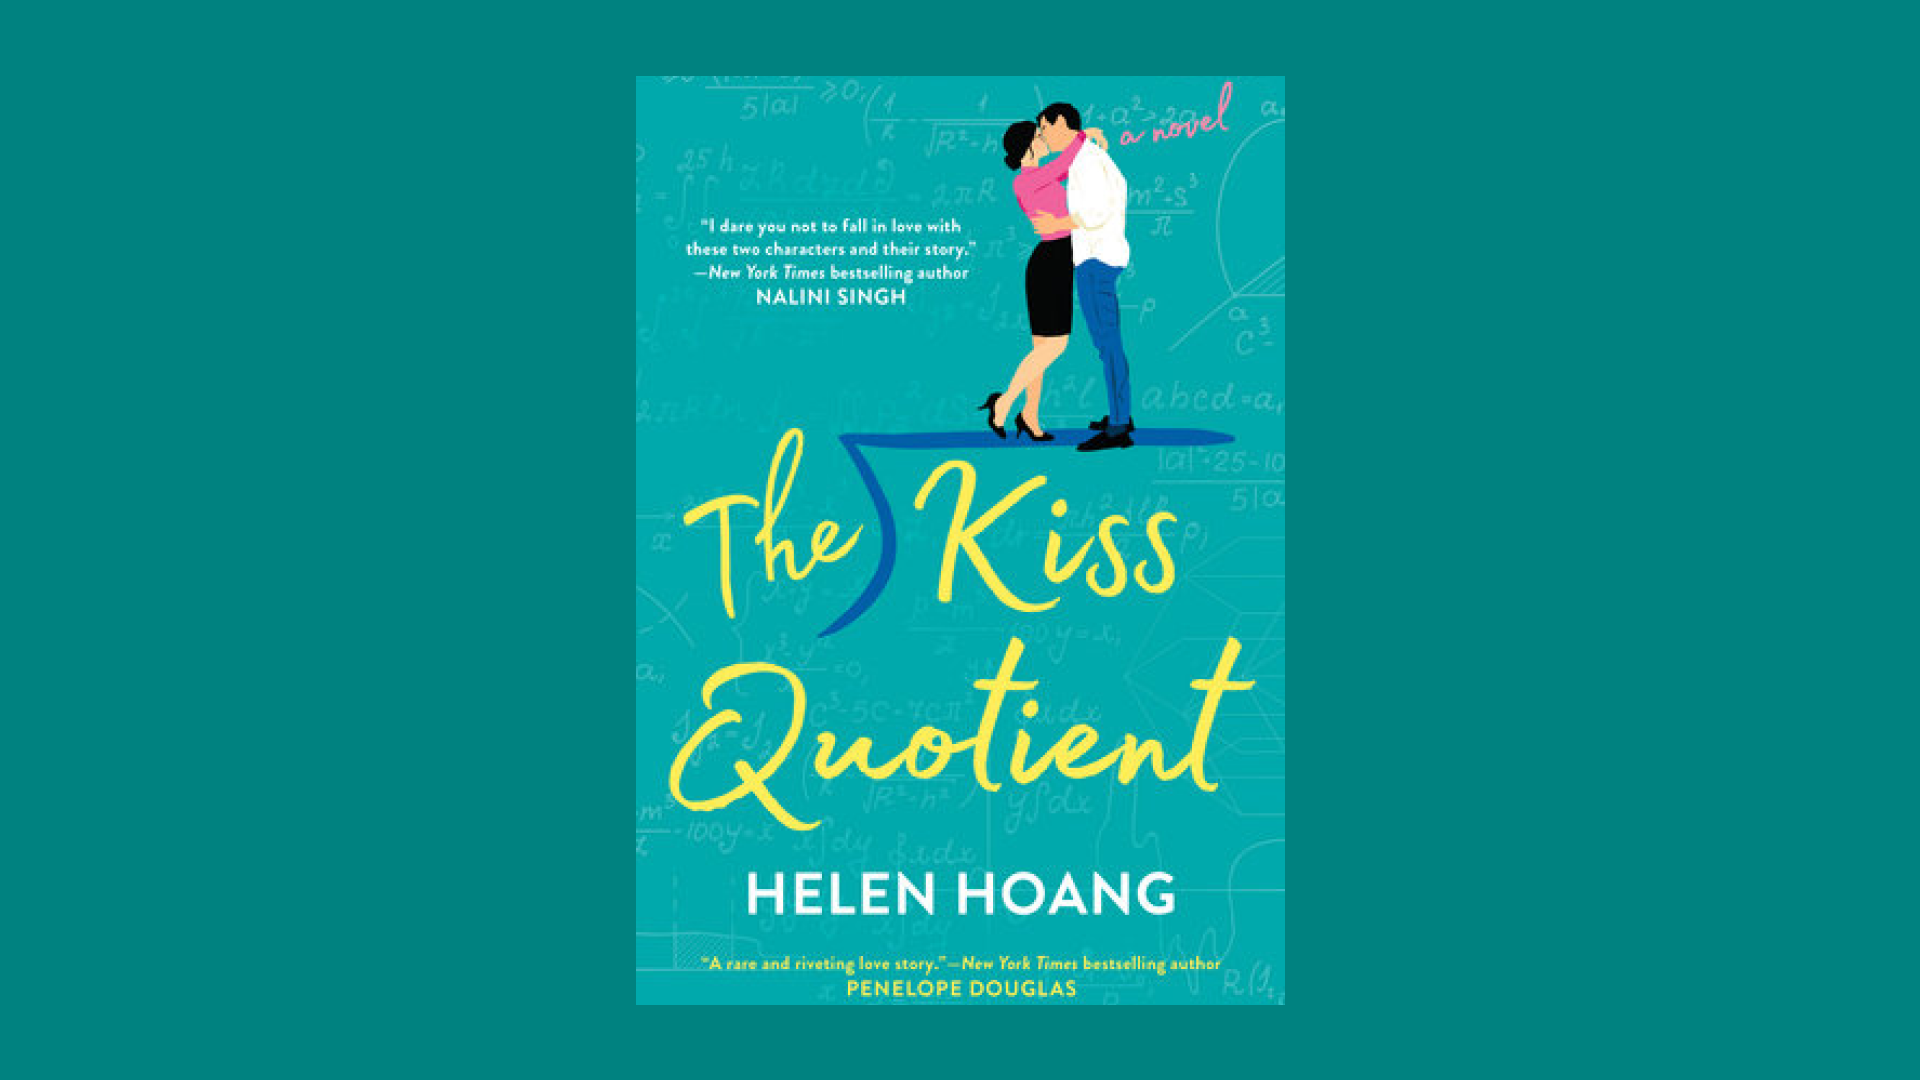 “The Kiss Quotient” by Helen Hoang